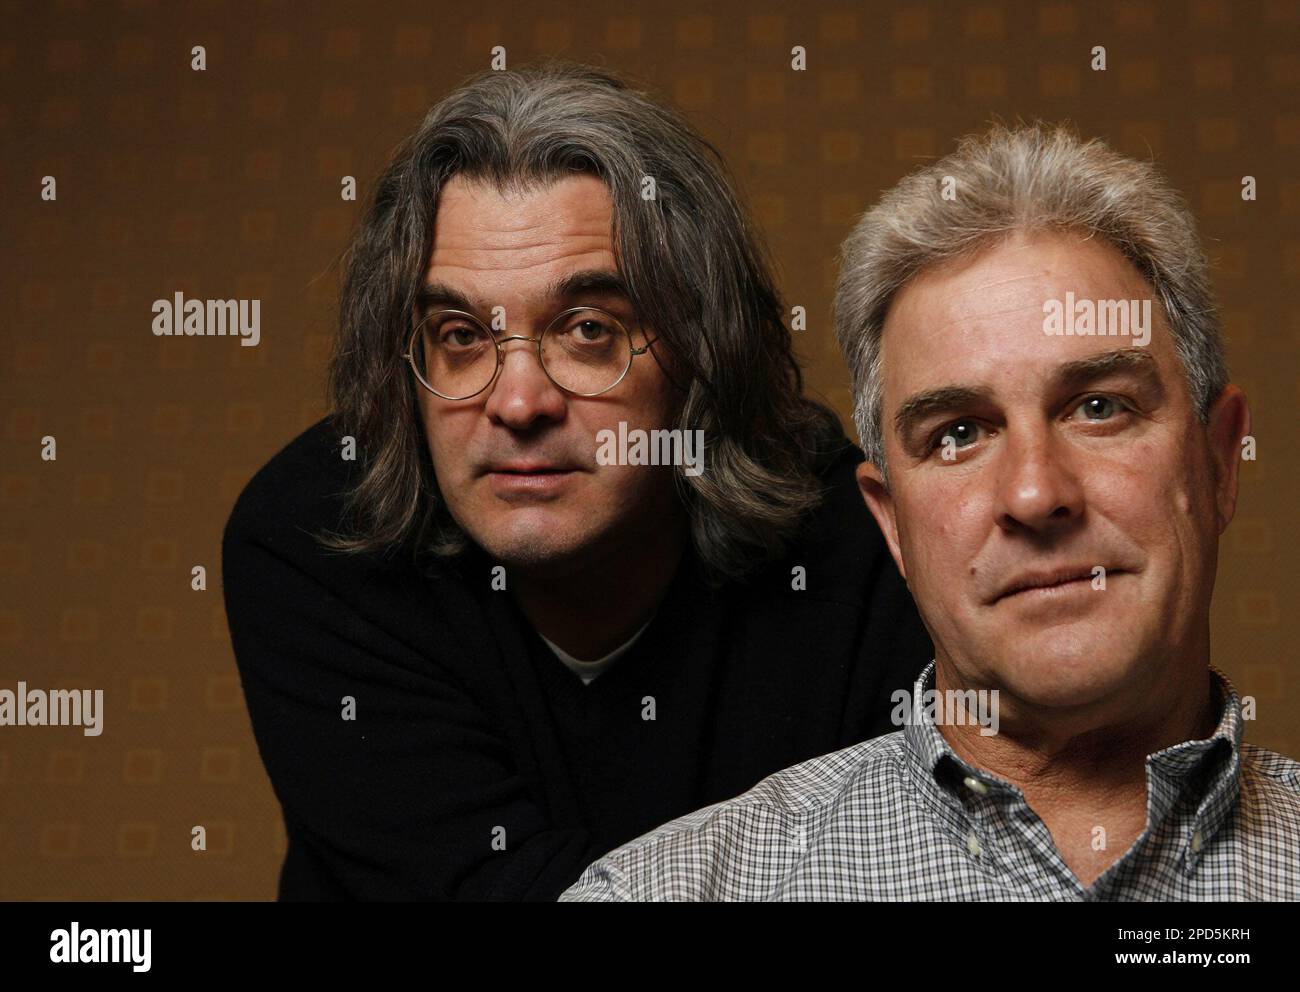 United 93 Director Paul Greengrass Left And Ben Sliney Pose For A Photograph Together